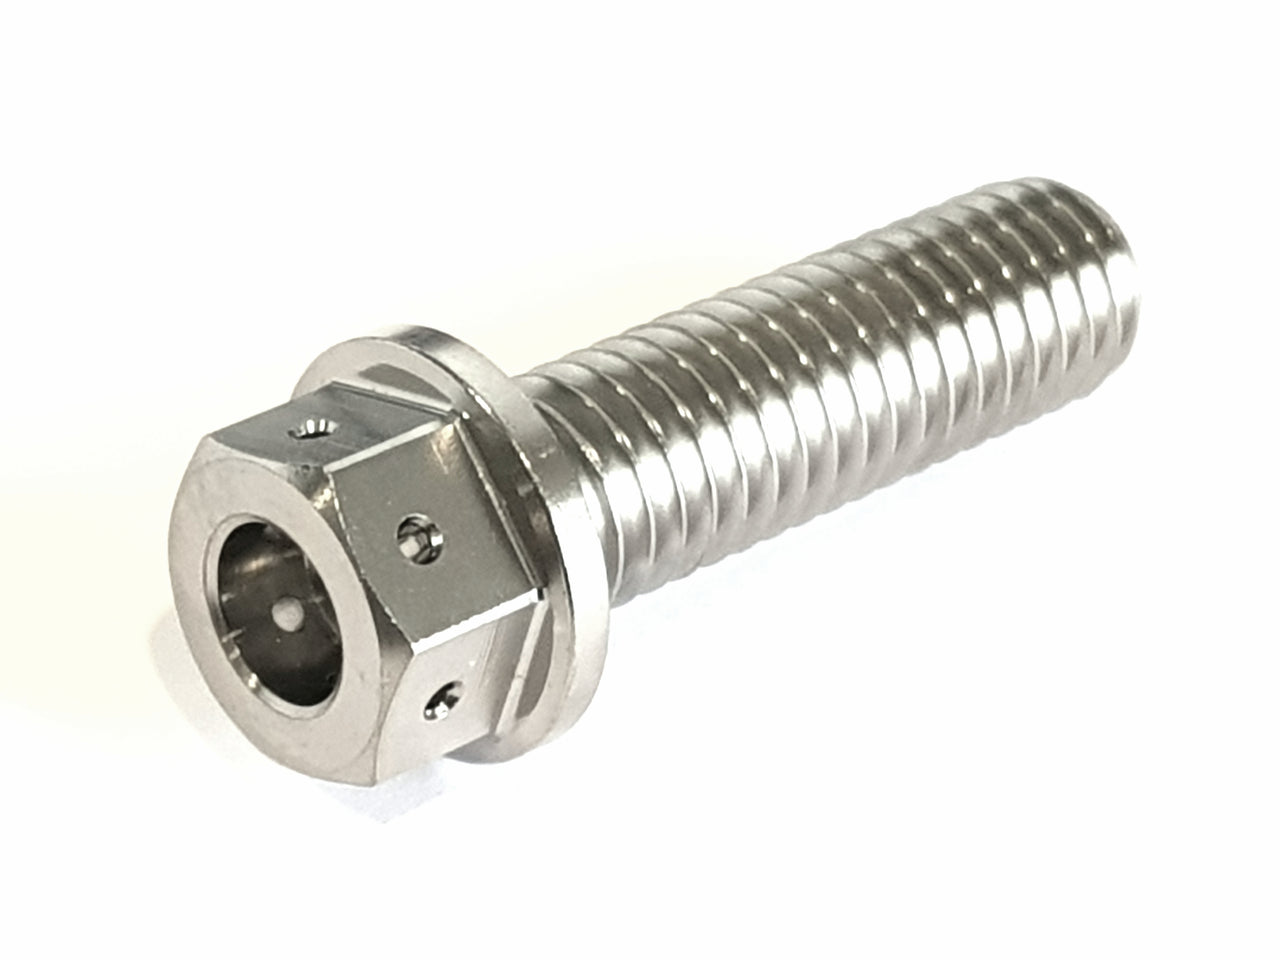 7/16 UNC 1.500" Reduced Hex bolt With Holes Drilled